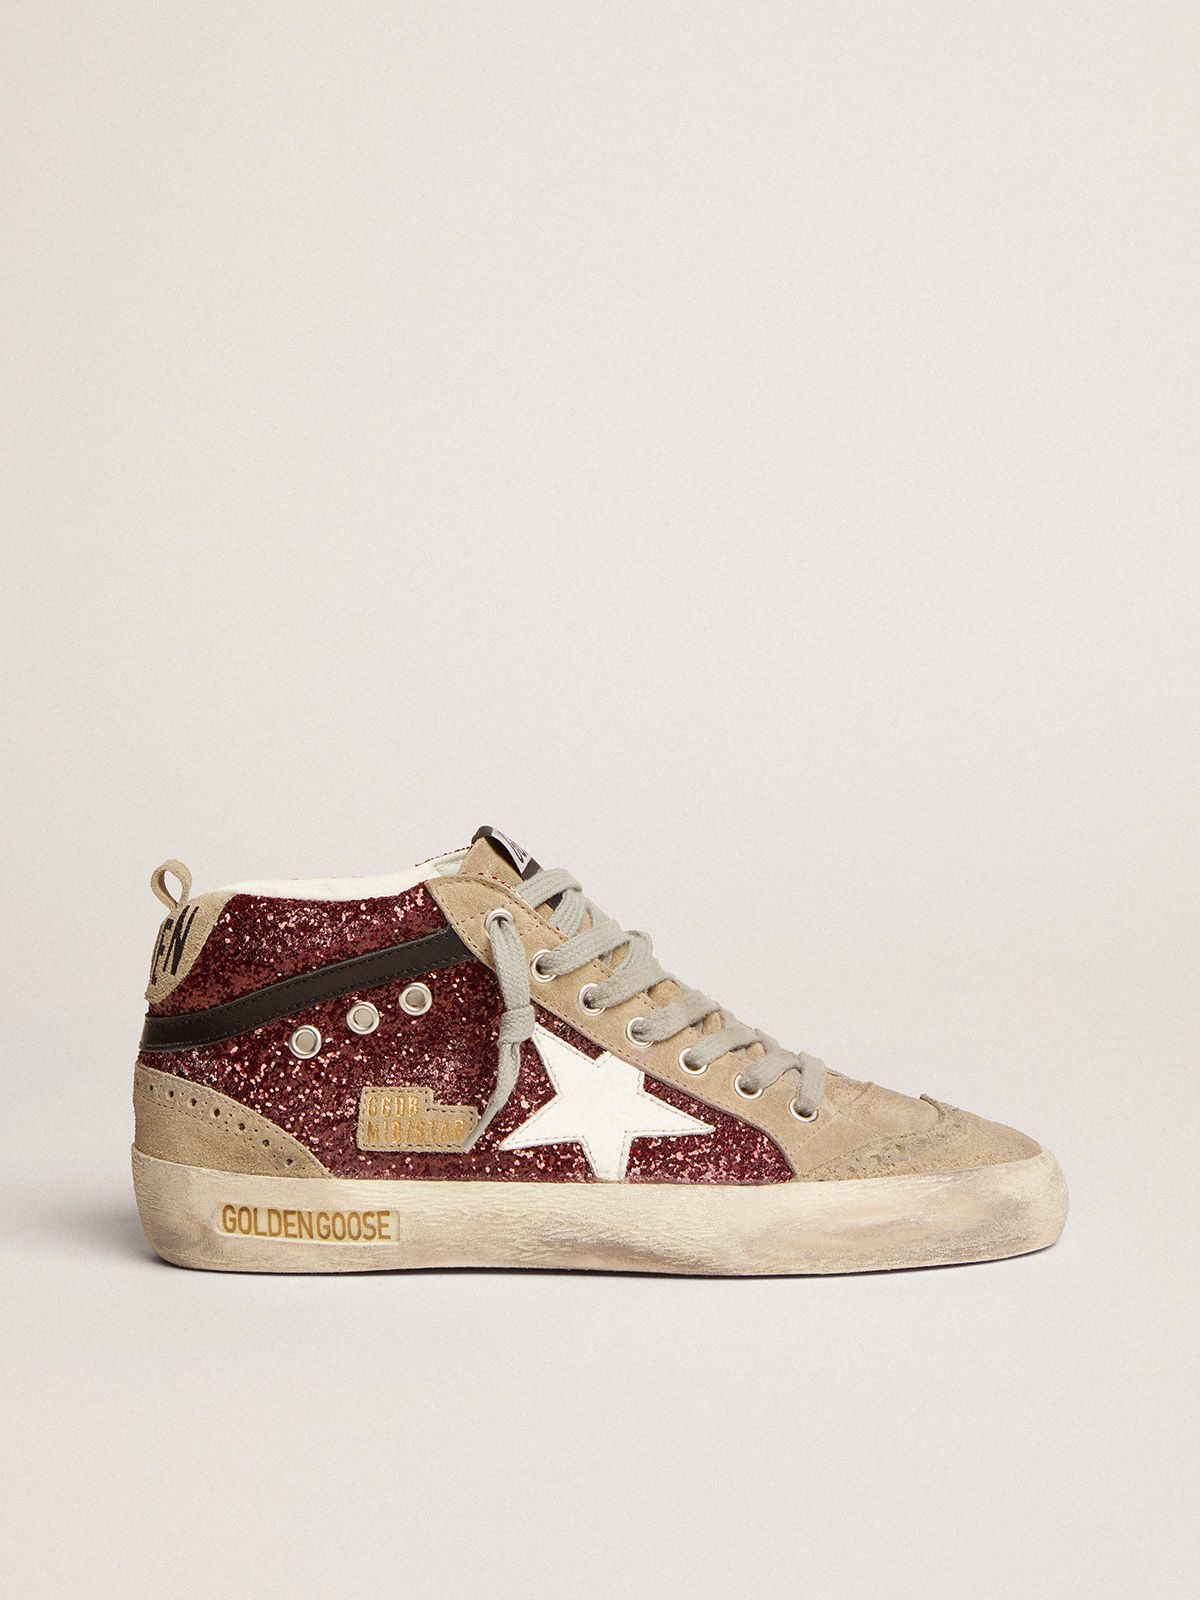 golden goose dove-gray Star white glitter burgundy leather in star and with suede inserts sneakers Mid